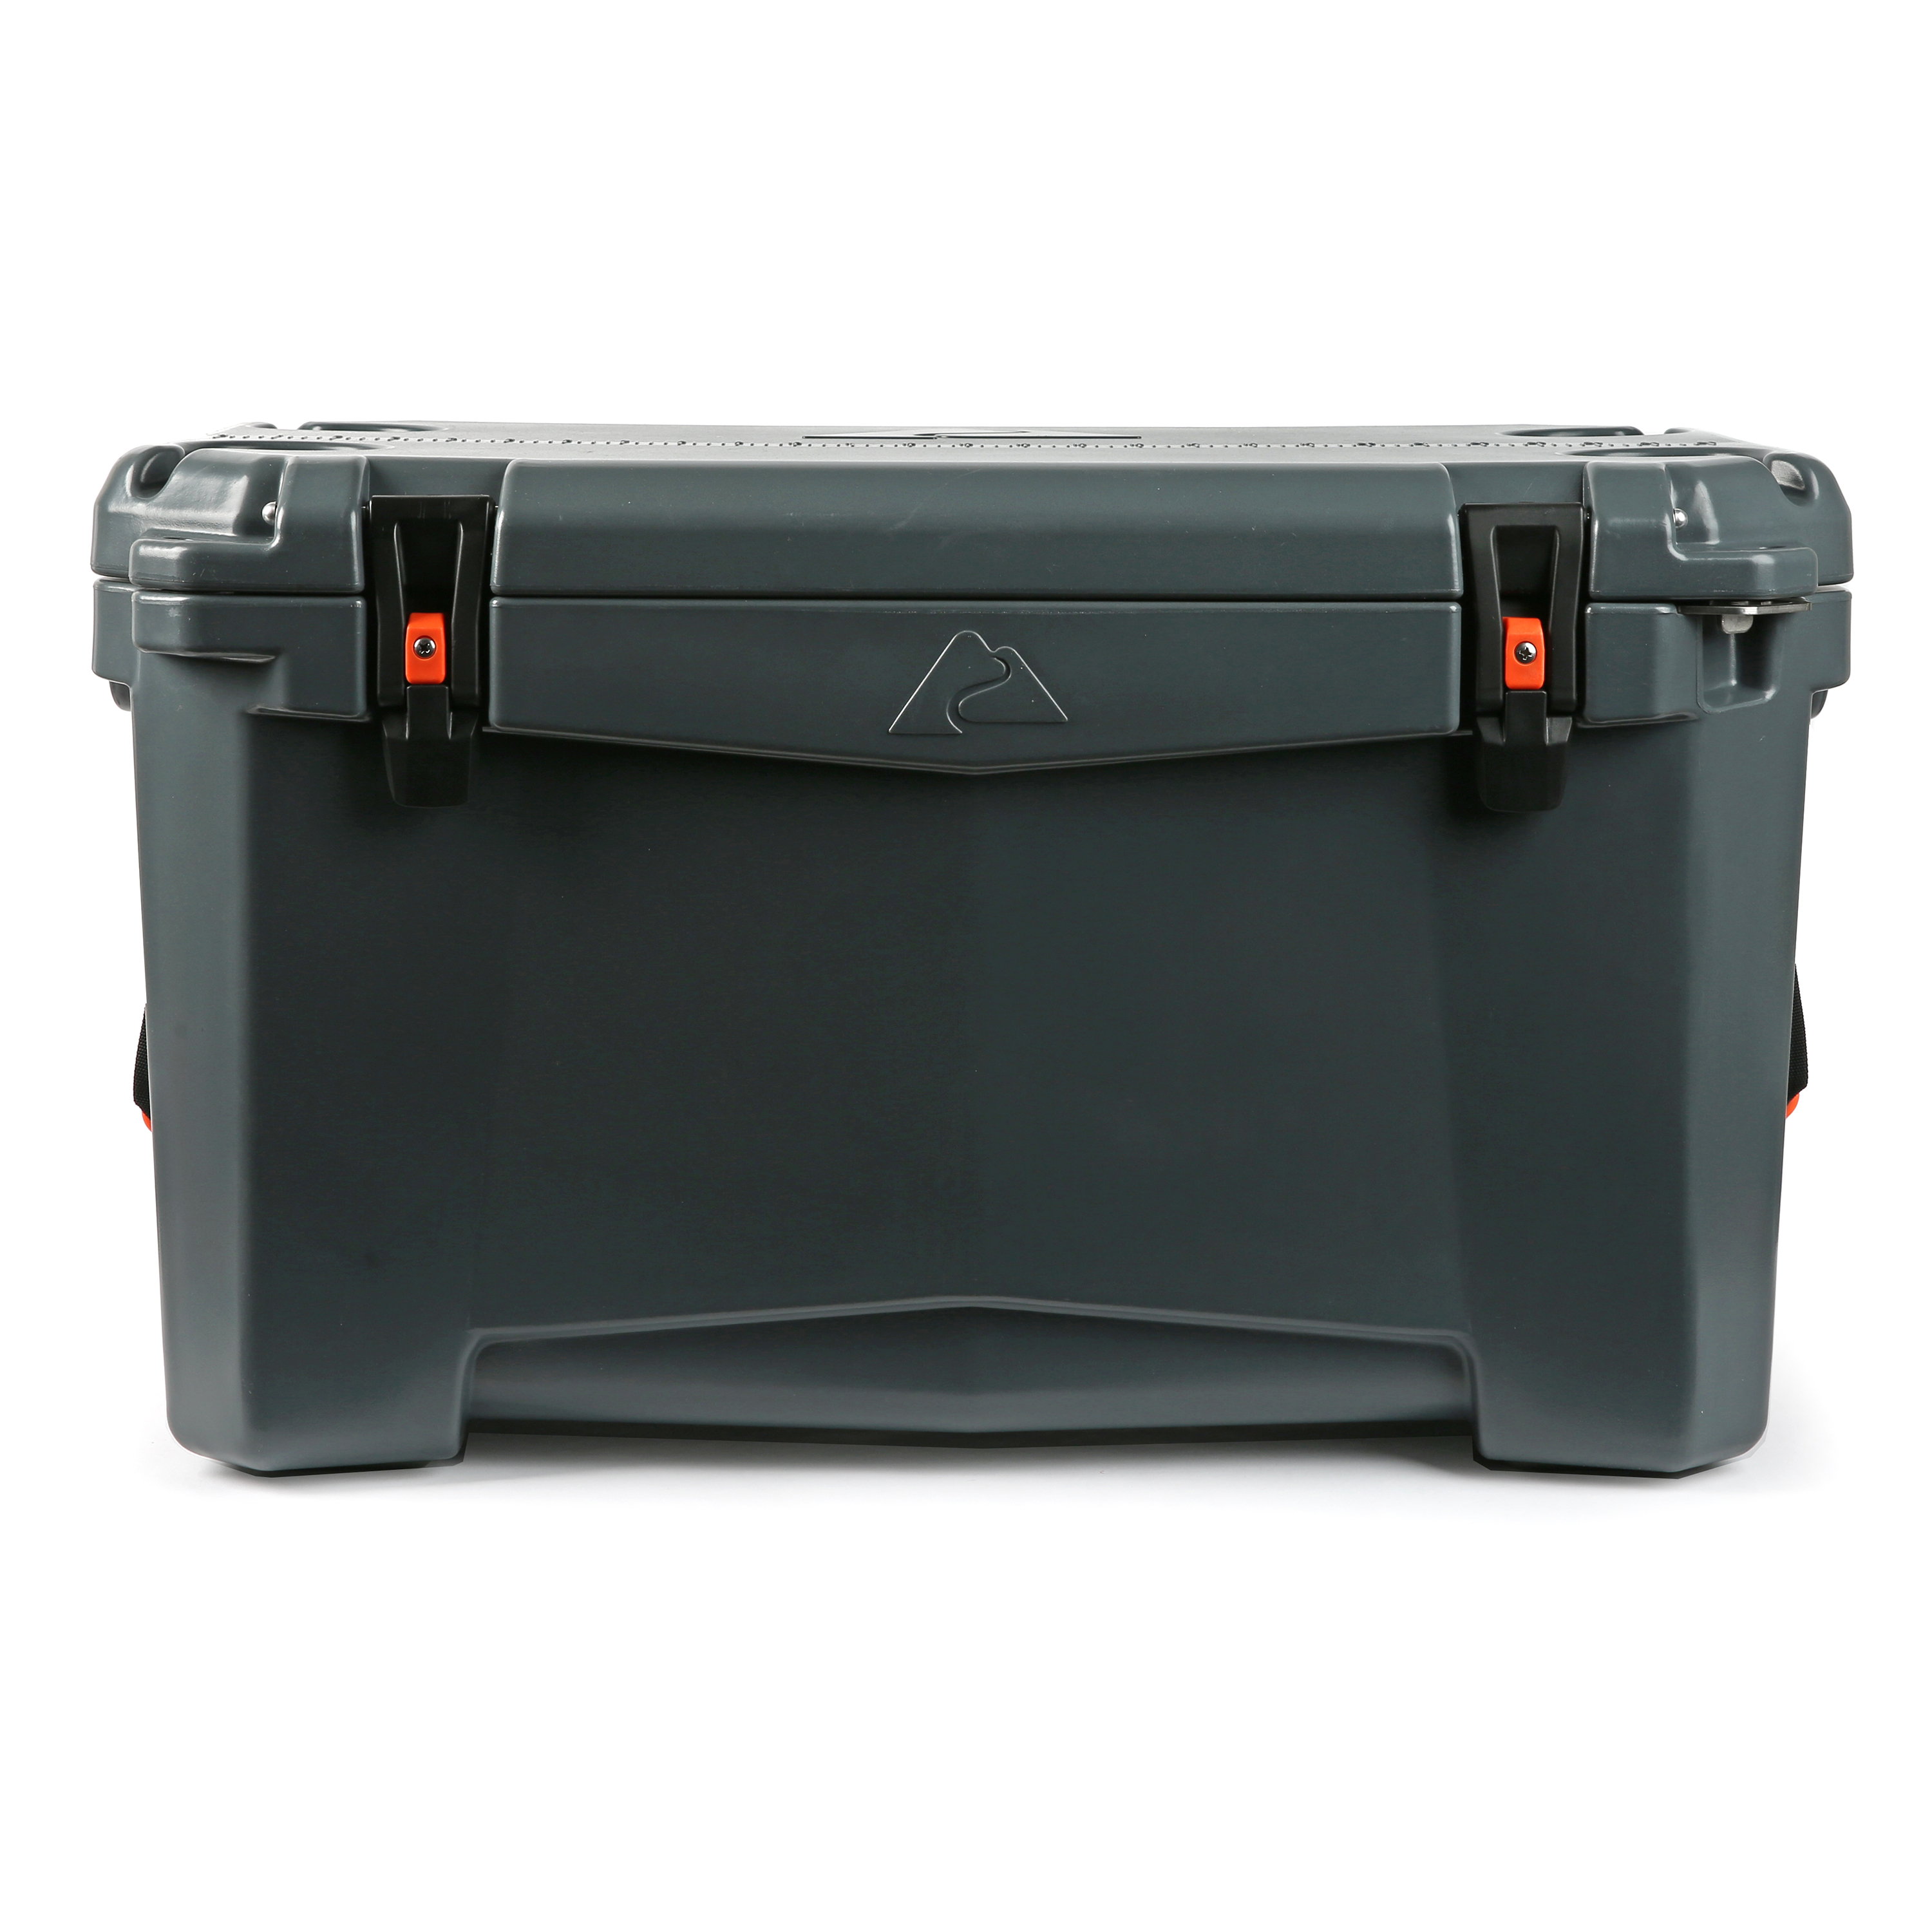 Ozark Trail 52 Quart High Performance Hard Sided Chest Cooler, Gray - image 1 of 11